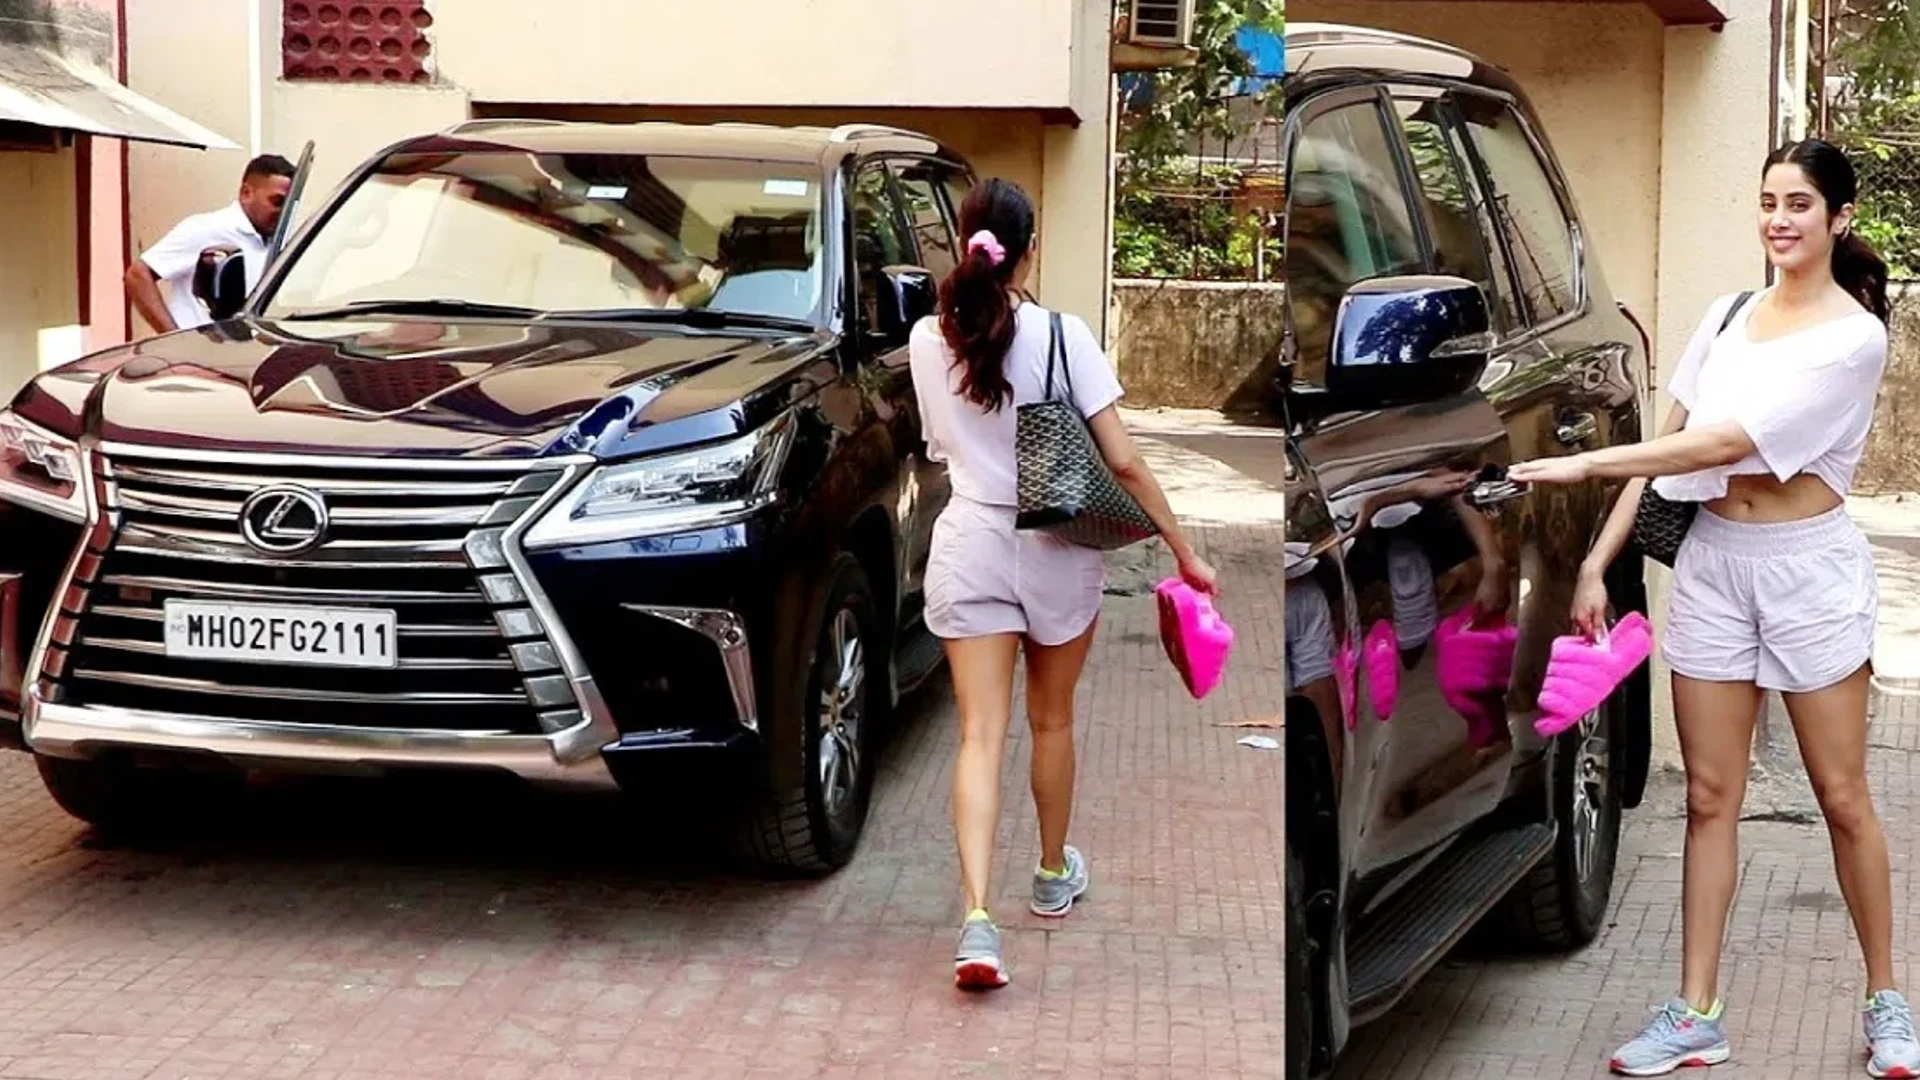 Janhvi Kapoor takes a ride in a Lexus LX 570 – Rs. 2.7 crores for her most expensive car